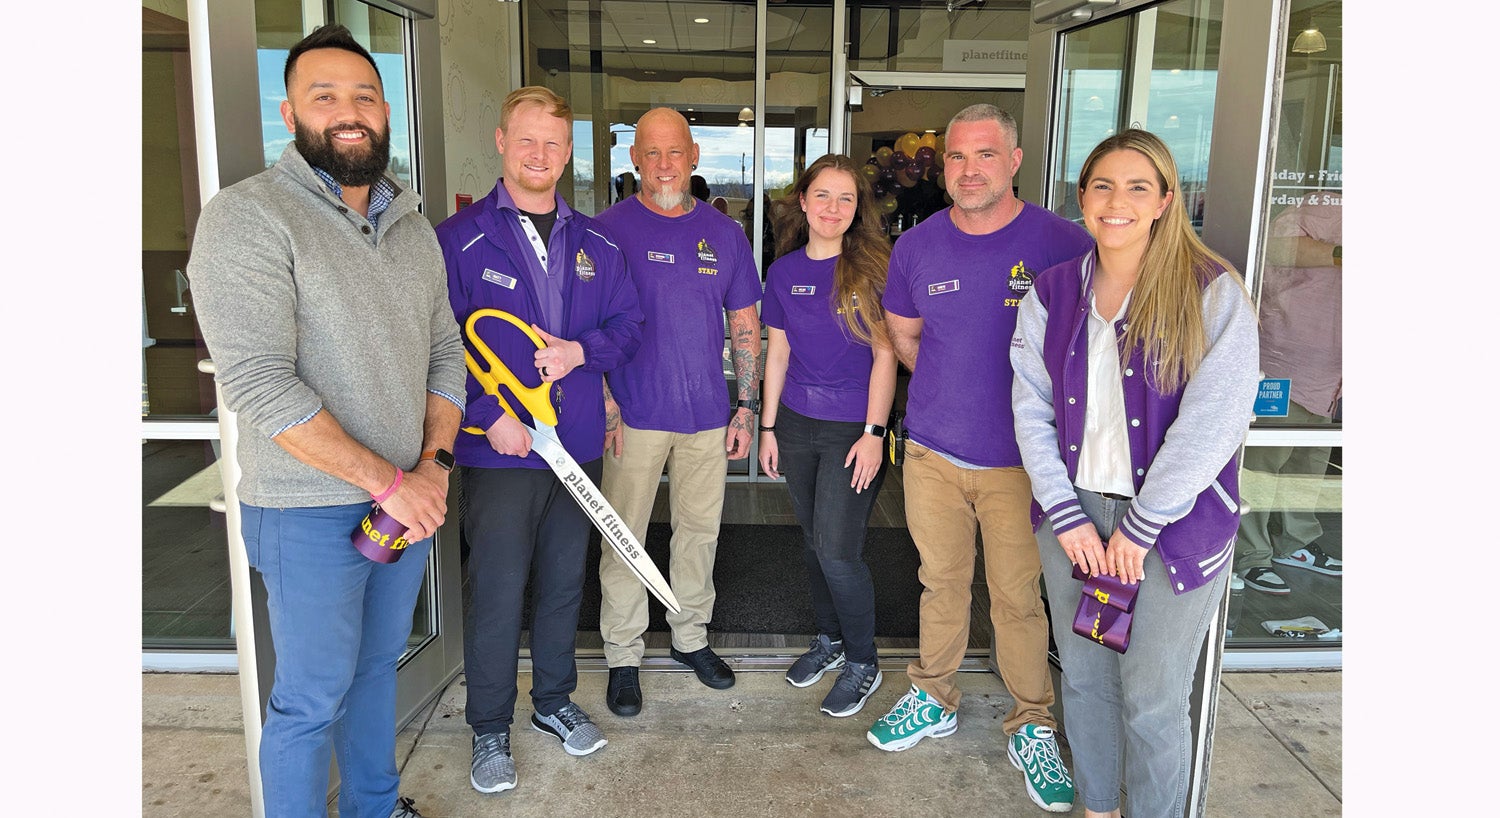 Planet Fitness celebrates grand opening with ribbon cutting, $5K donation  to NECCO - The Tribune